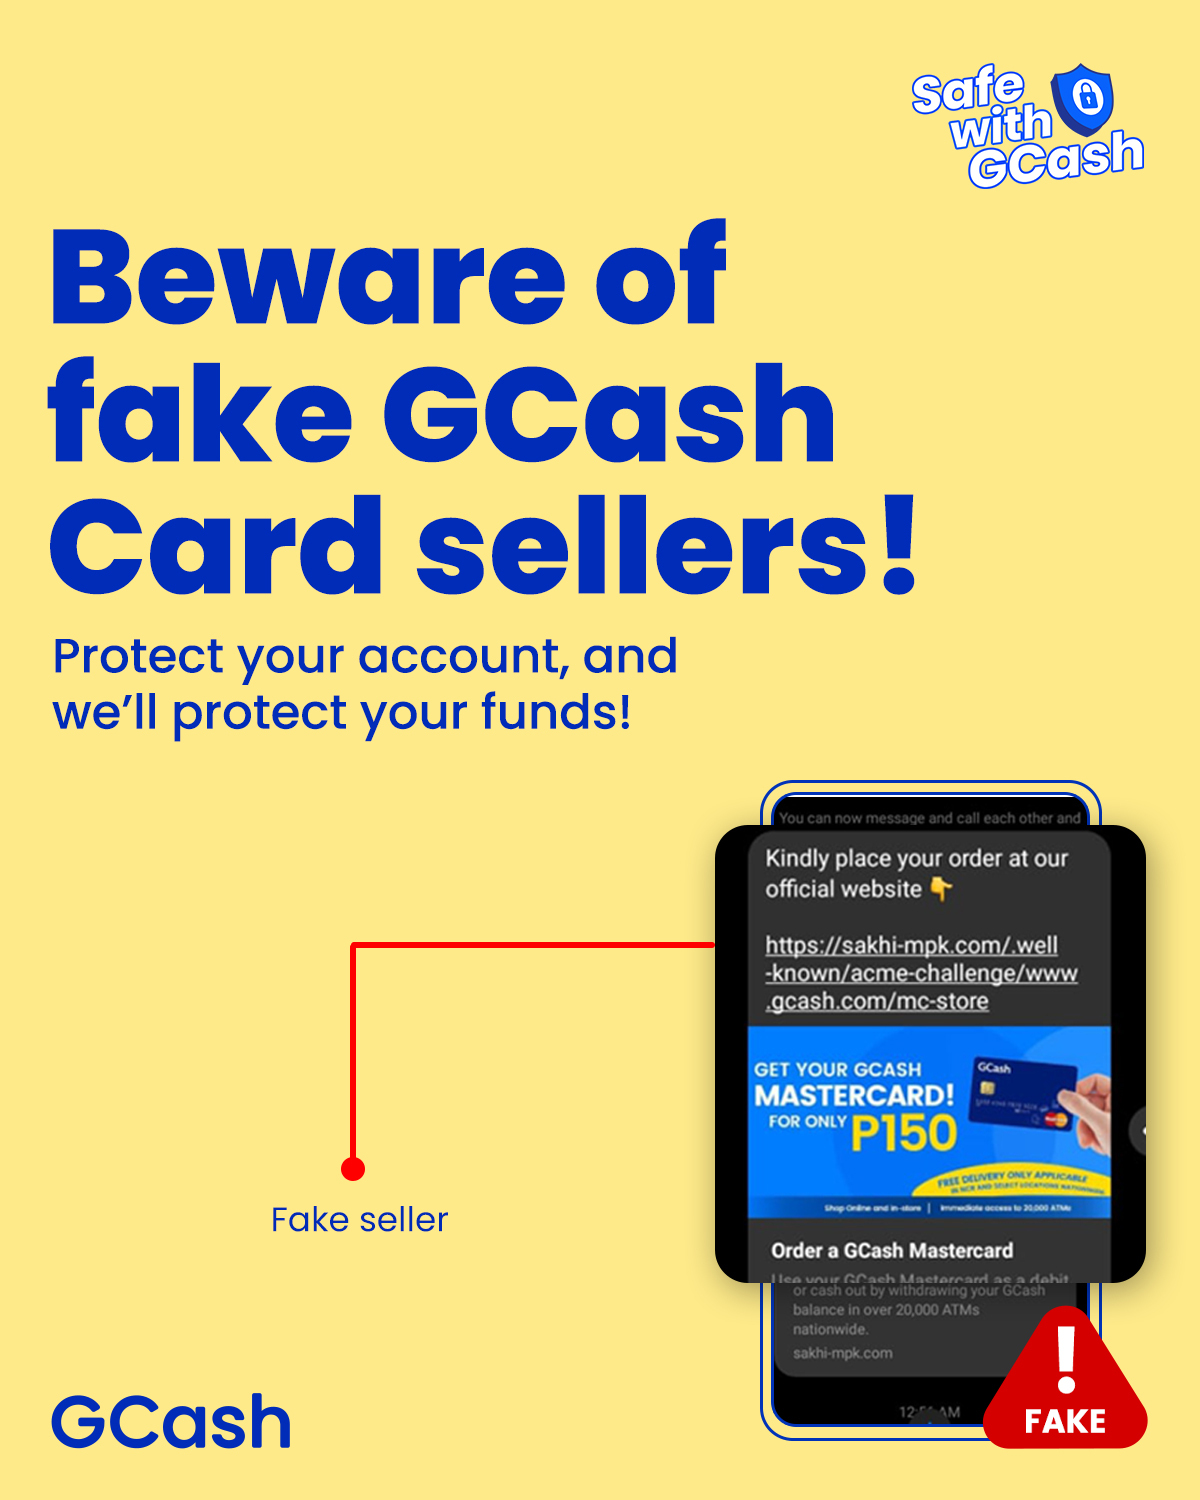 how to get gcash mastercard - fake sellers